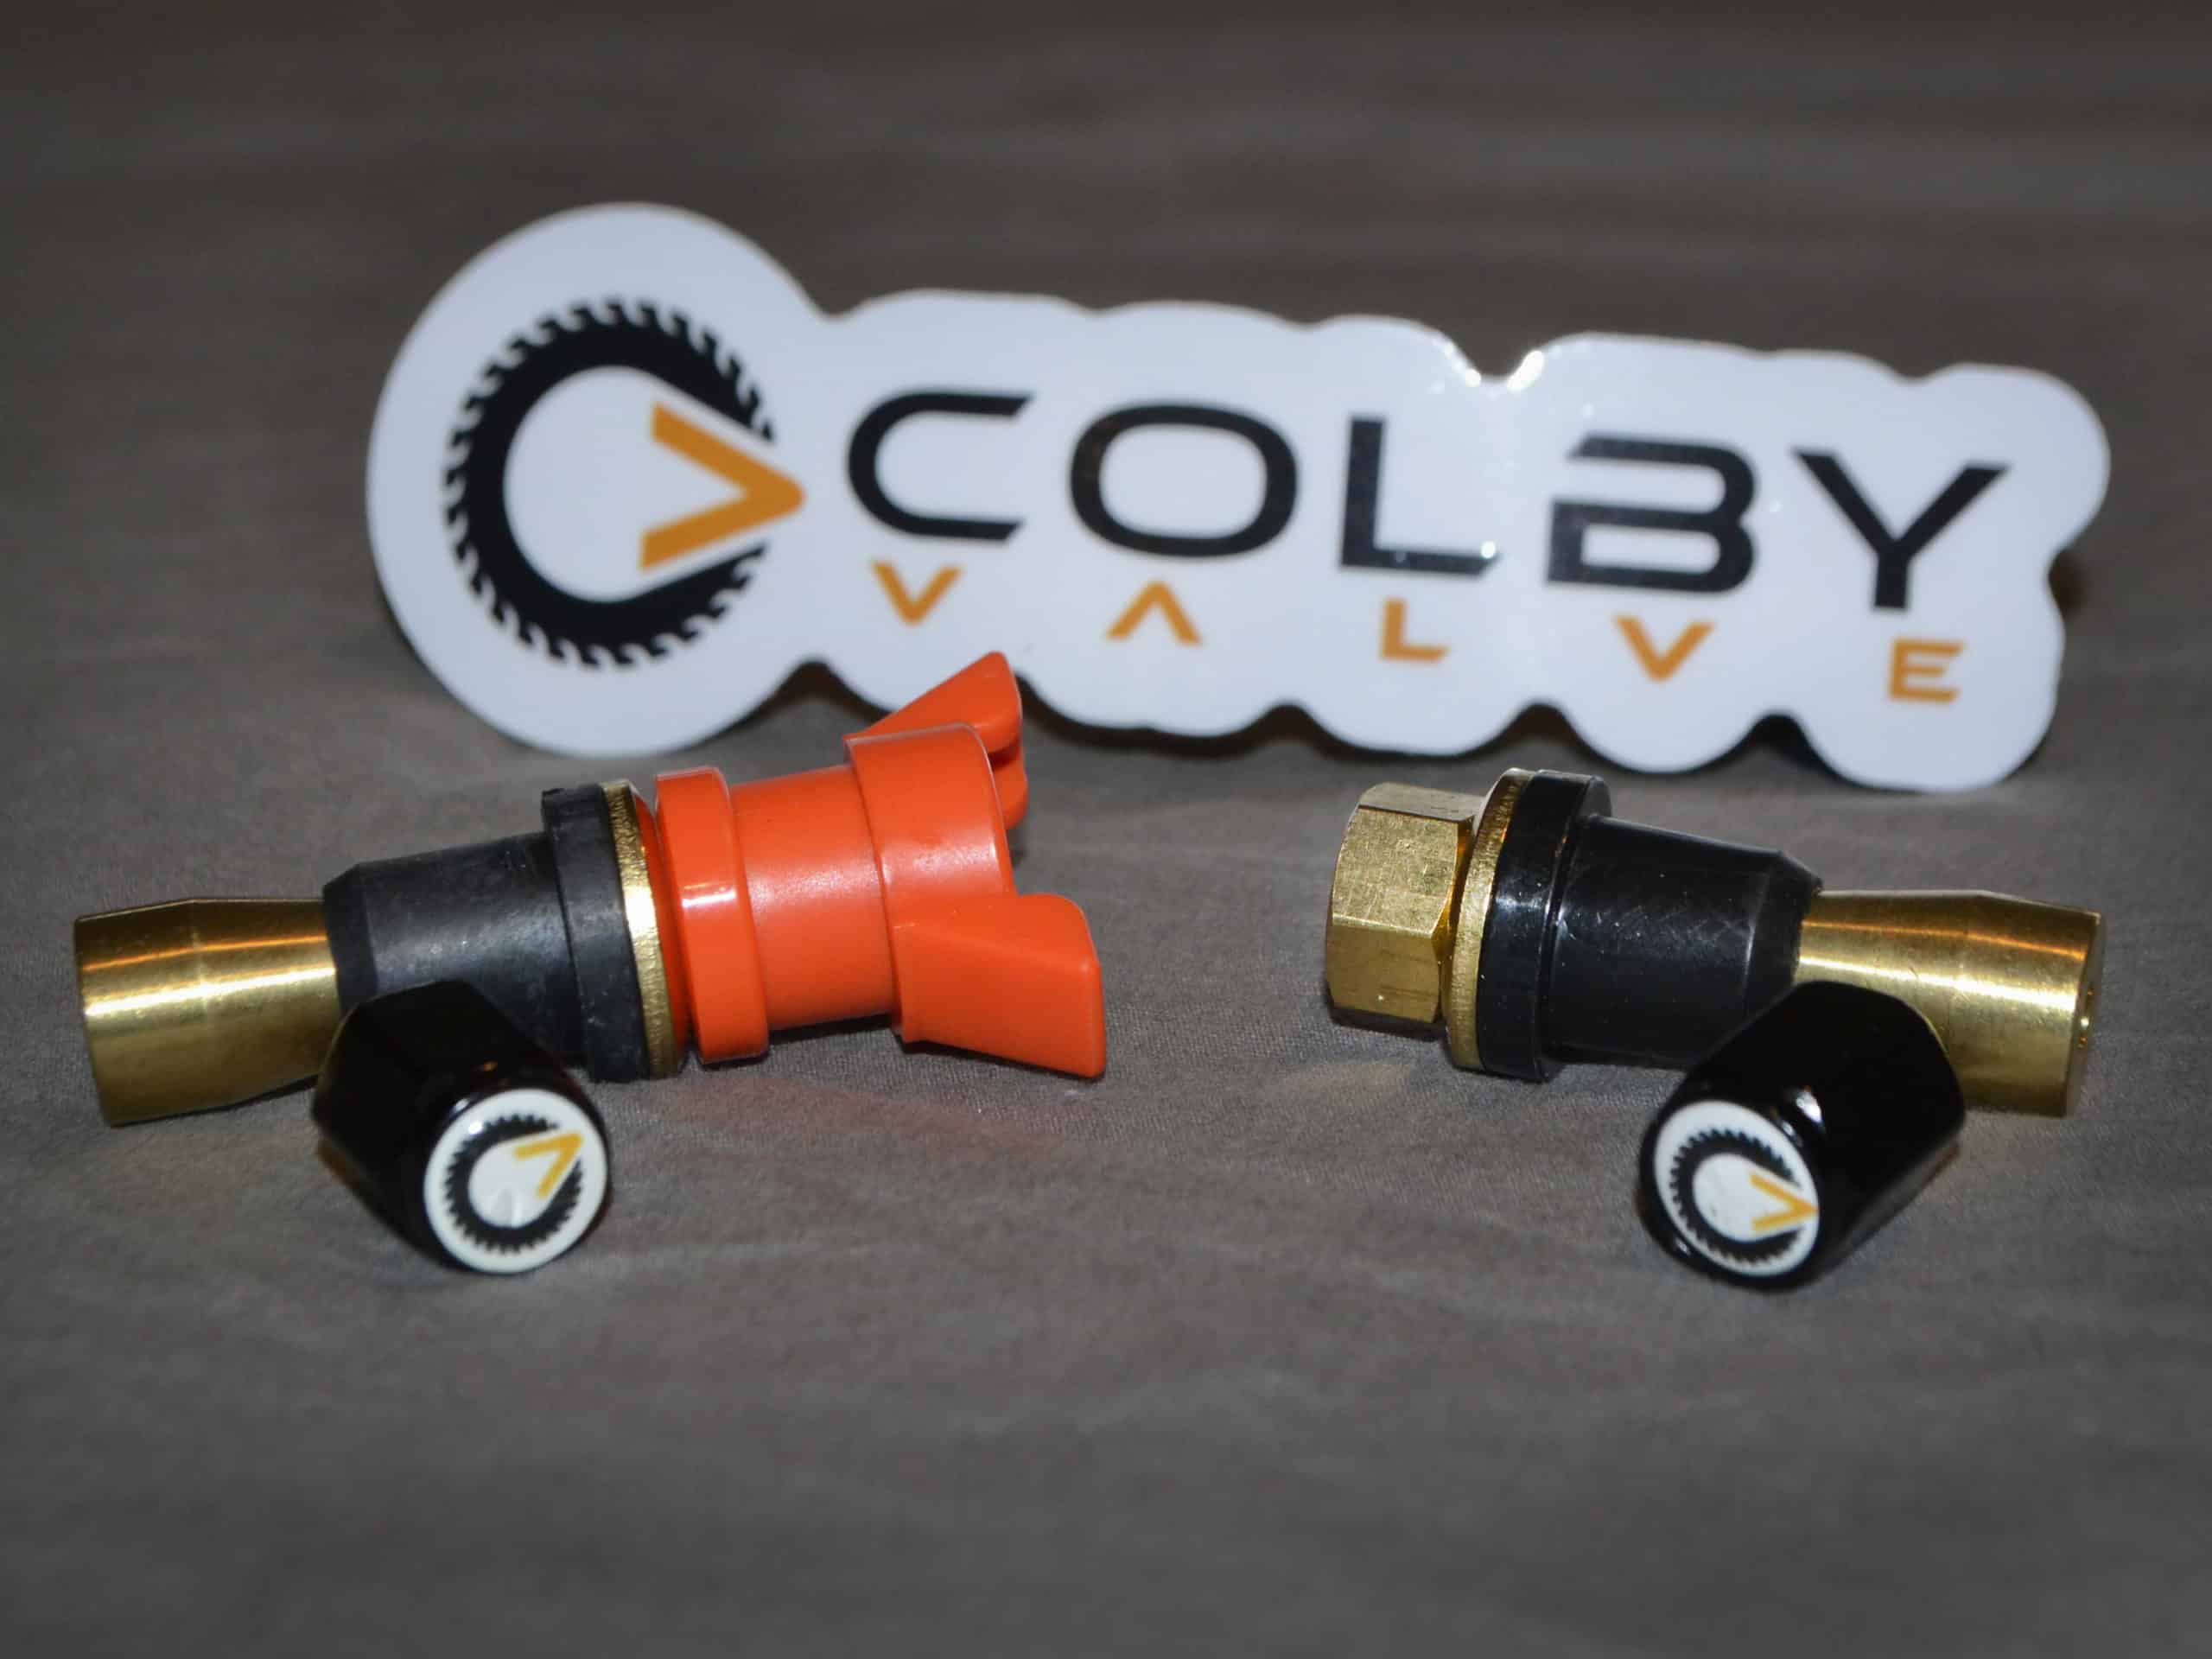 Colby Valve Ultimate and Emergency stems